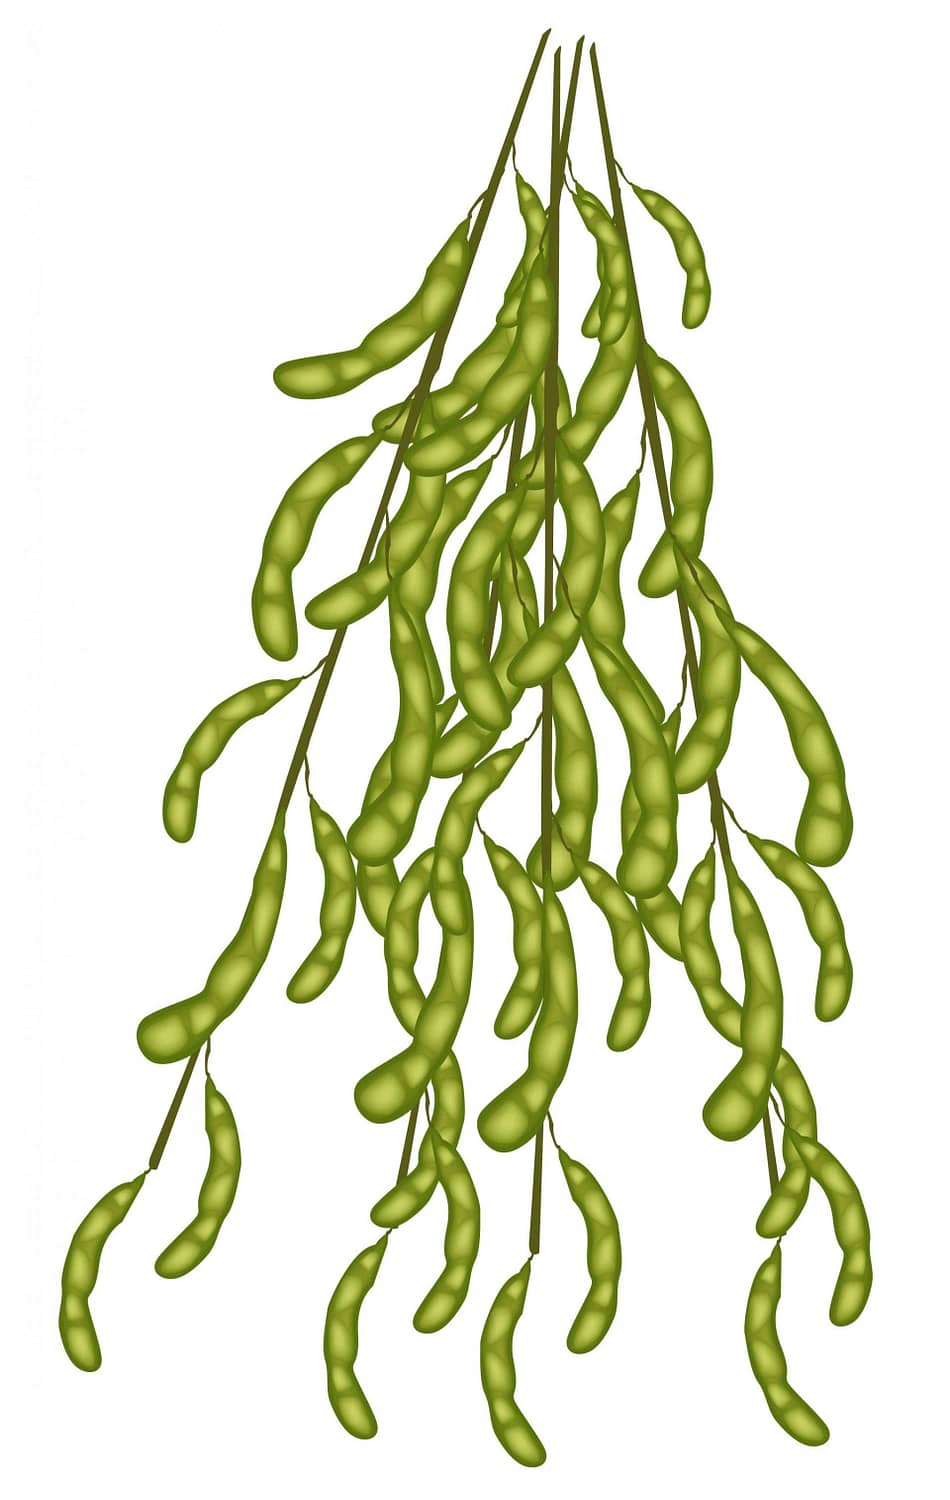 Illustration of green soybeans